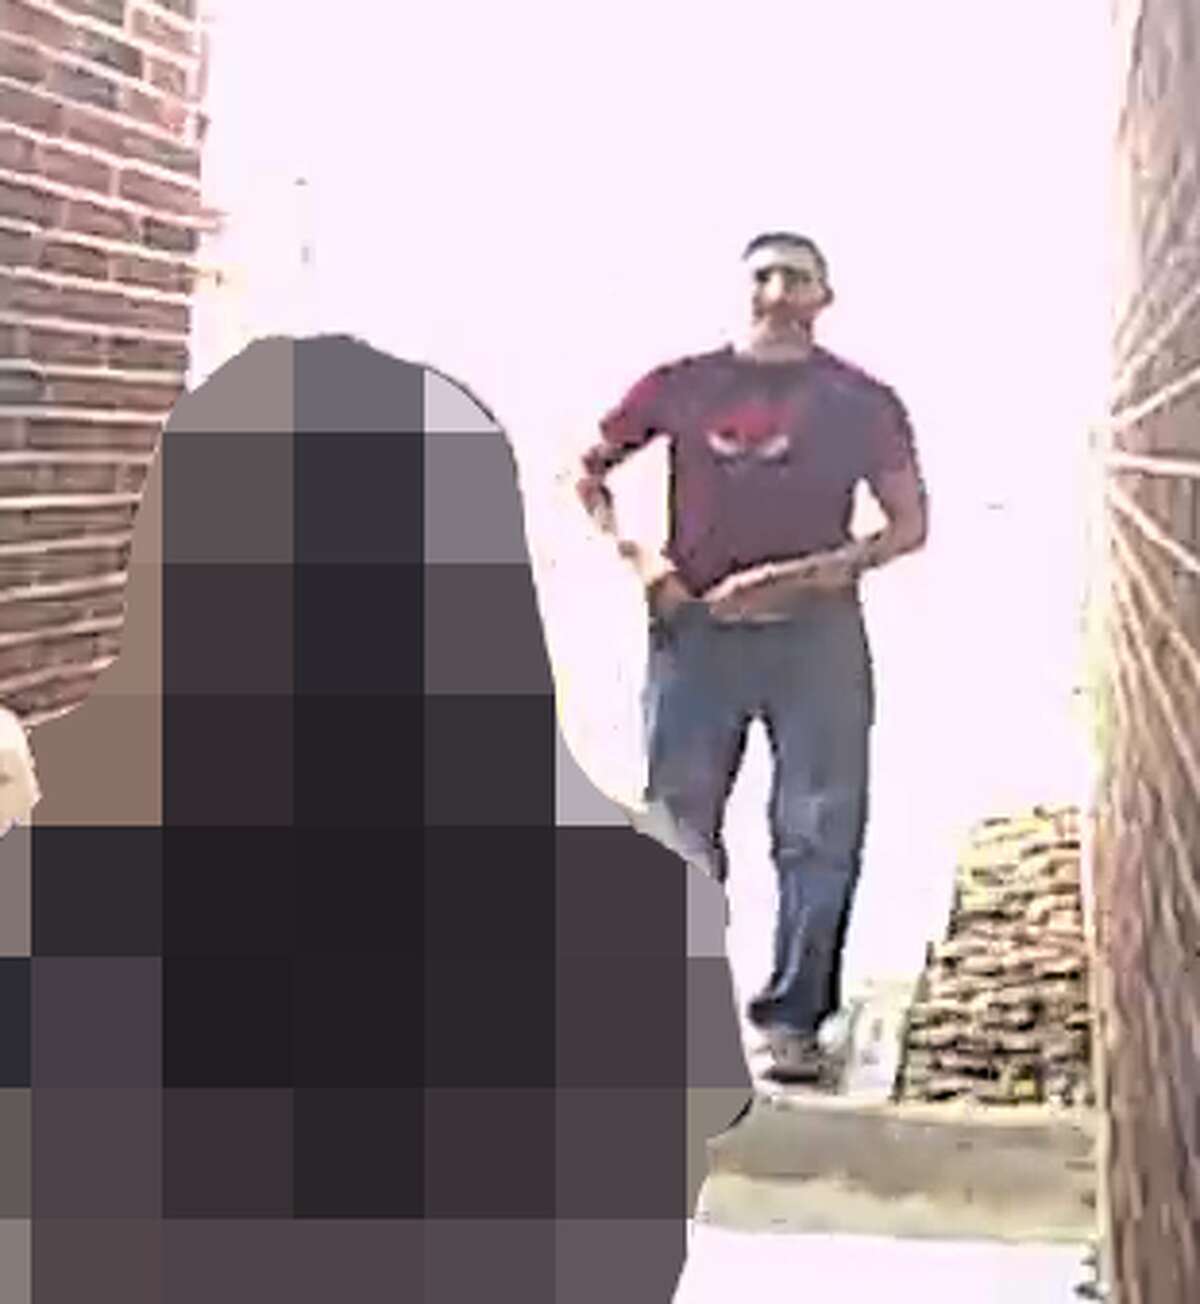 A man who allegedly sexually assaulted a child in League City is seen on home surveillance camera Dec. 8, 2019. Anyone with information is urged to call League City police detective Tisdale at 281-338-4189 or Houston Crime Stoppers at 713-222-TIPS (8477).